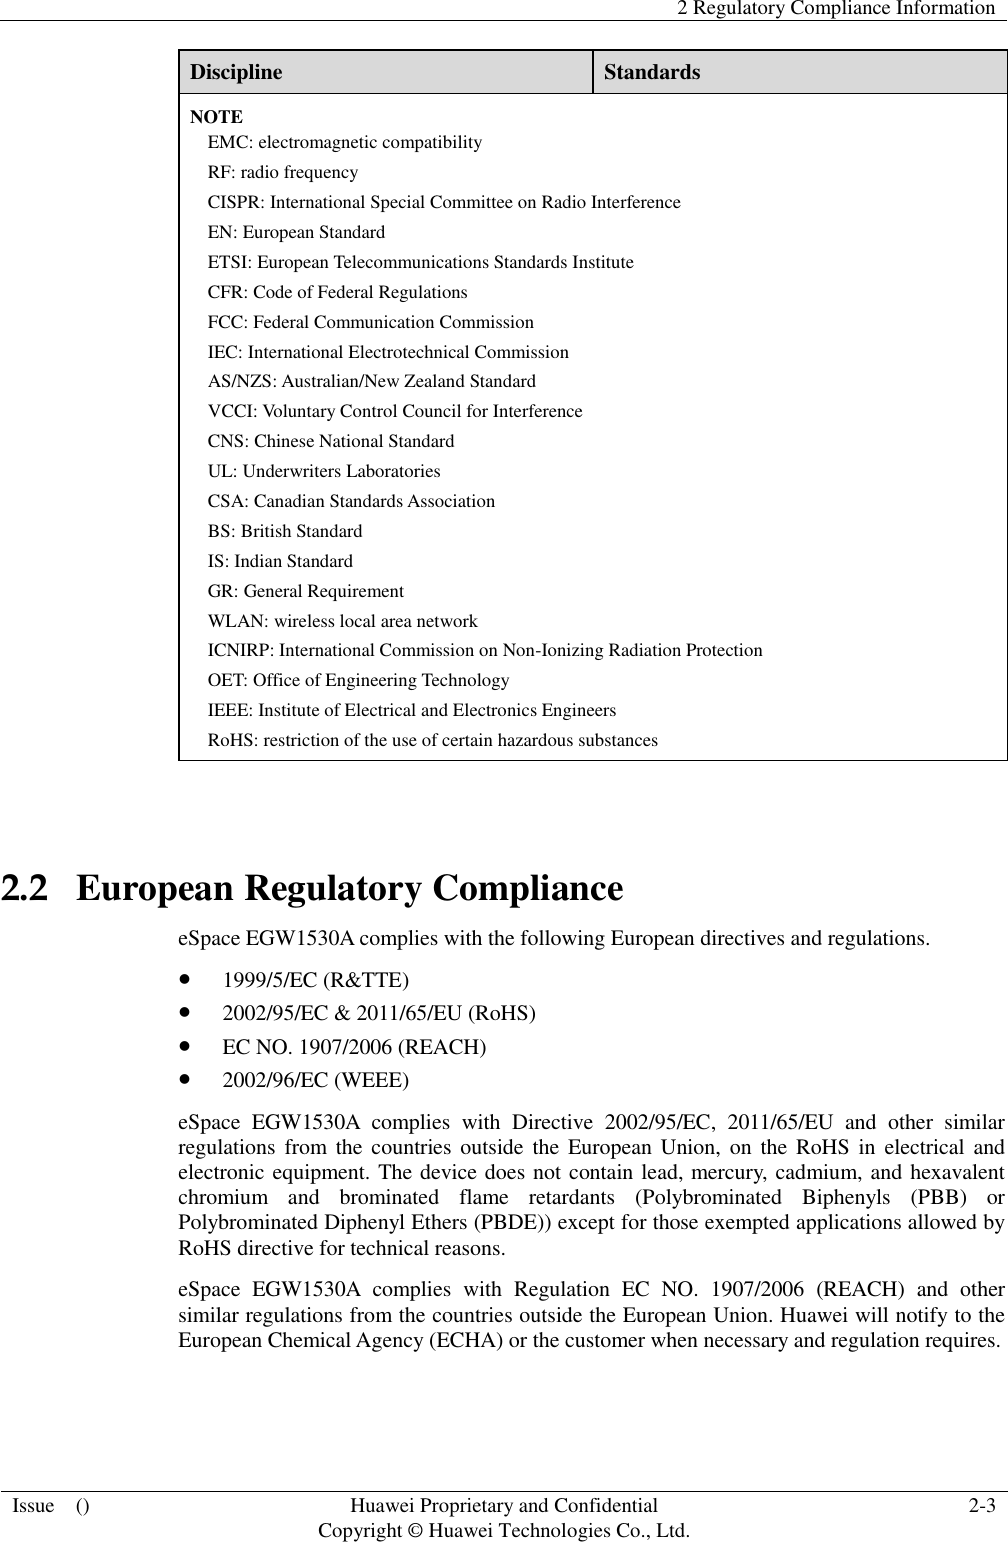   2 Regulatory Compliance Information  Issue    () Huawei Proprietary and Confidential                                     Copyright © Huawei Technologies Co., Ltd. 2-3  Discipline Standards NOTE EMC: electromagnetic compatibility RF: radio frequency CISPR: International Special Committee on Radio Interference EN: European Standard ETSI: European Telecommunications Standards Institute CFR: Code of Federal Regulations FCC: Federal Communication Commission IEC: International Electrotechnical Commission AS/NZS: Australian/New Zealand Standard VCCI: Voluntary Control Council for Interference CNS: Chinese National Standard UL: Underwriters Laboratories CSA: Canadian Standards Association BS: British Standard IS: Indian Standard GR: General Requirement WLAN: wireless local area network ICNIRP: International Commission on Non-Ionizing Radiation Protection OET: Office of Engineering Technology IEEE: Institute of Electrical and Electronics Engineers RoHS: restriction of the use of certain hazardous substances  2.2   European Regulatory Compliance eSpace EGW1530A complies with the following European directives and regulations.  1999/5/EC (R&amp;TTE)  2002/95/EC &amp; 2011/65/EU (RoHS)  EC NO. 1907/2006 (REACH)  2002/96/EC (WEEE) eSpace  EGW1530A  complies  with  Directive  2002/95/EC,  2011/65/EU  and  other  similar regulations from  the  countries  outside  the  European Union, on the RoHS in electrical and electronic equipment. The device does not contain lead, mercury, cadmium, and hexavalent chromium  and  brominated  flame  retardants  (Polybrominated  Biphenyls  (PBB)  or Polybrominated Diphenyl Ethers (PBDE)) except for those exempted applications allowed by RoHS directive for technical reasons.   eSpace  EGW1530A  complies  with  Regulation  EC  NO.  1907/2006  (REACH)  and  other similar regulations from the countries outside the European Union. Huawei will notify to the European Chemical Agency (ECHA) or the customer when necessary and regulation requires.  